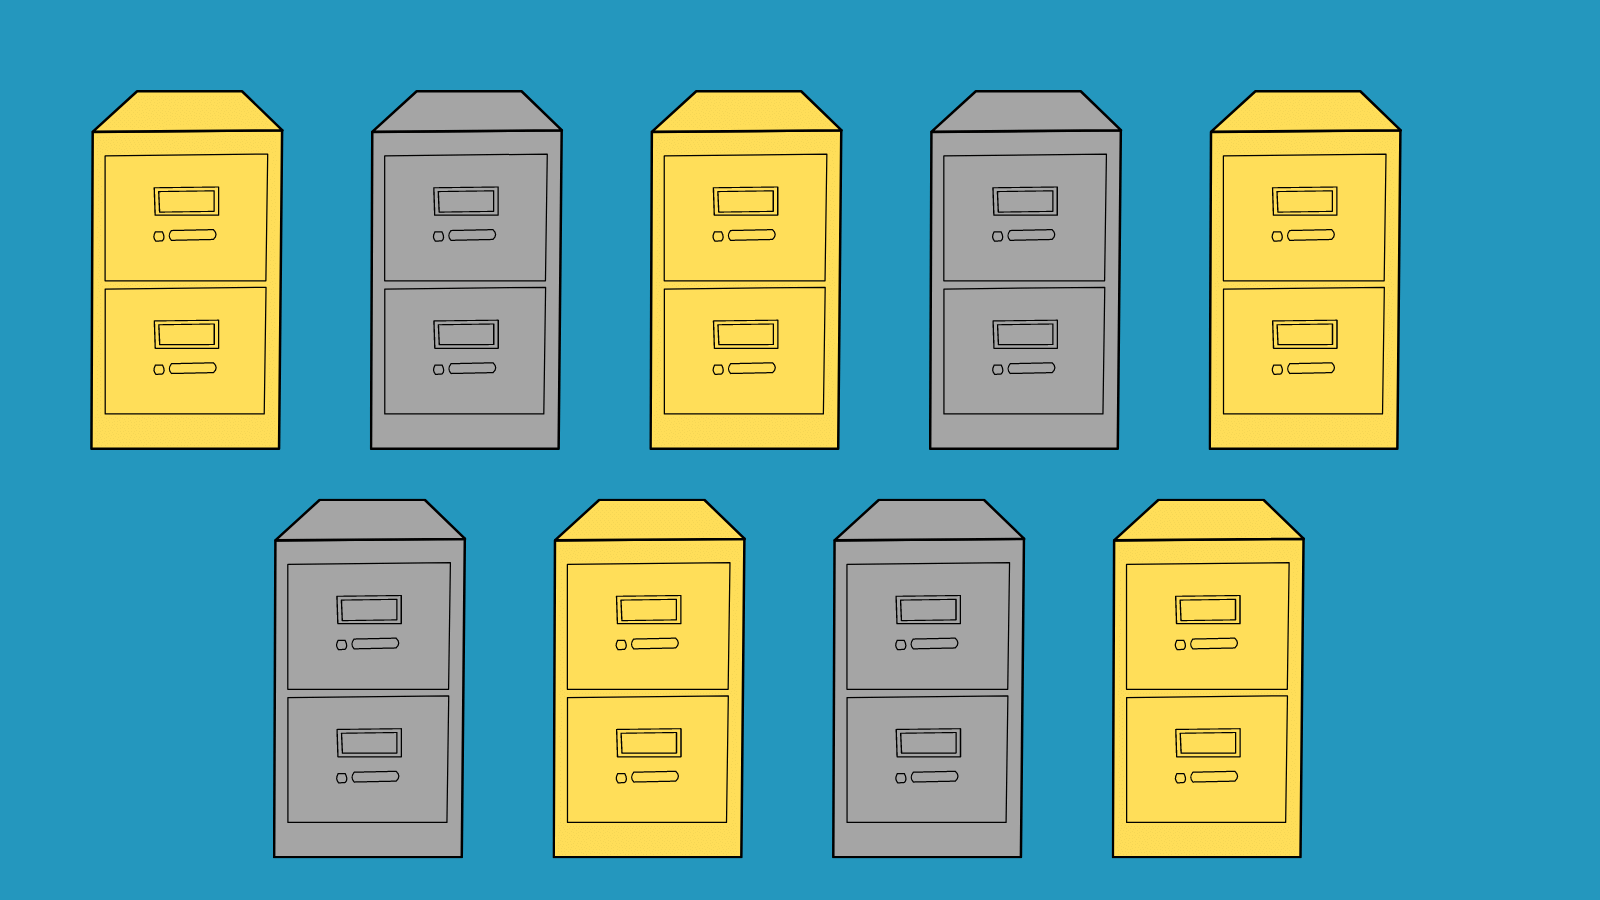 File Cabinets in a repeating pattern